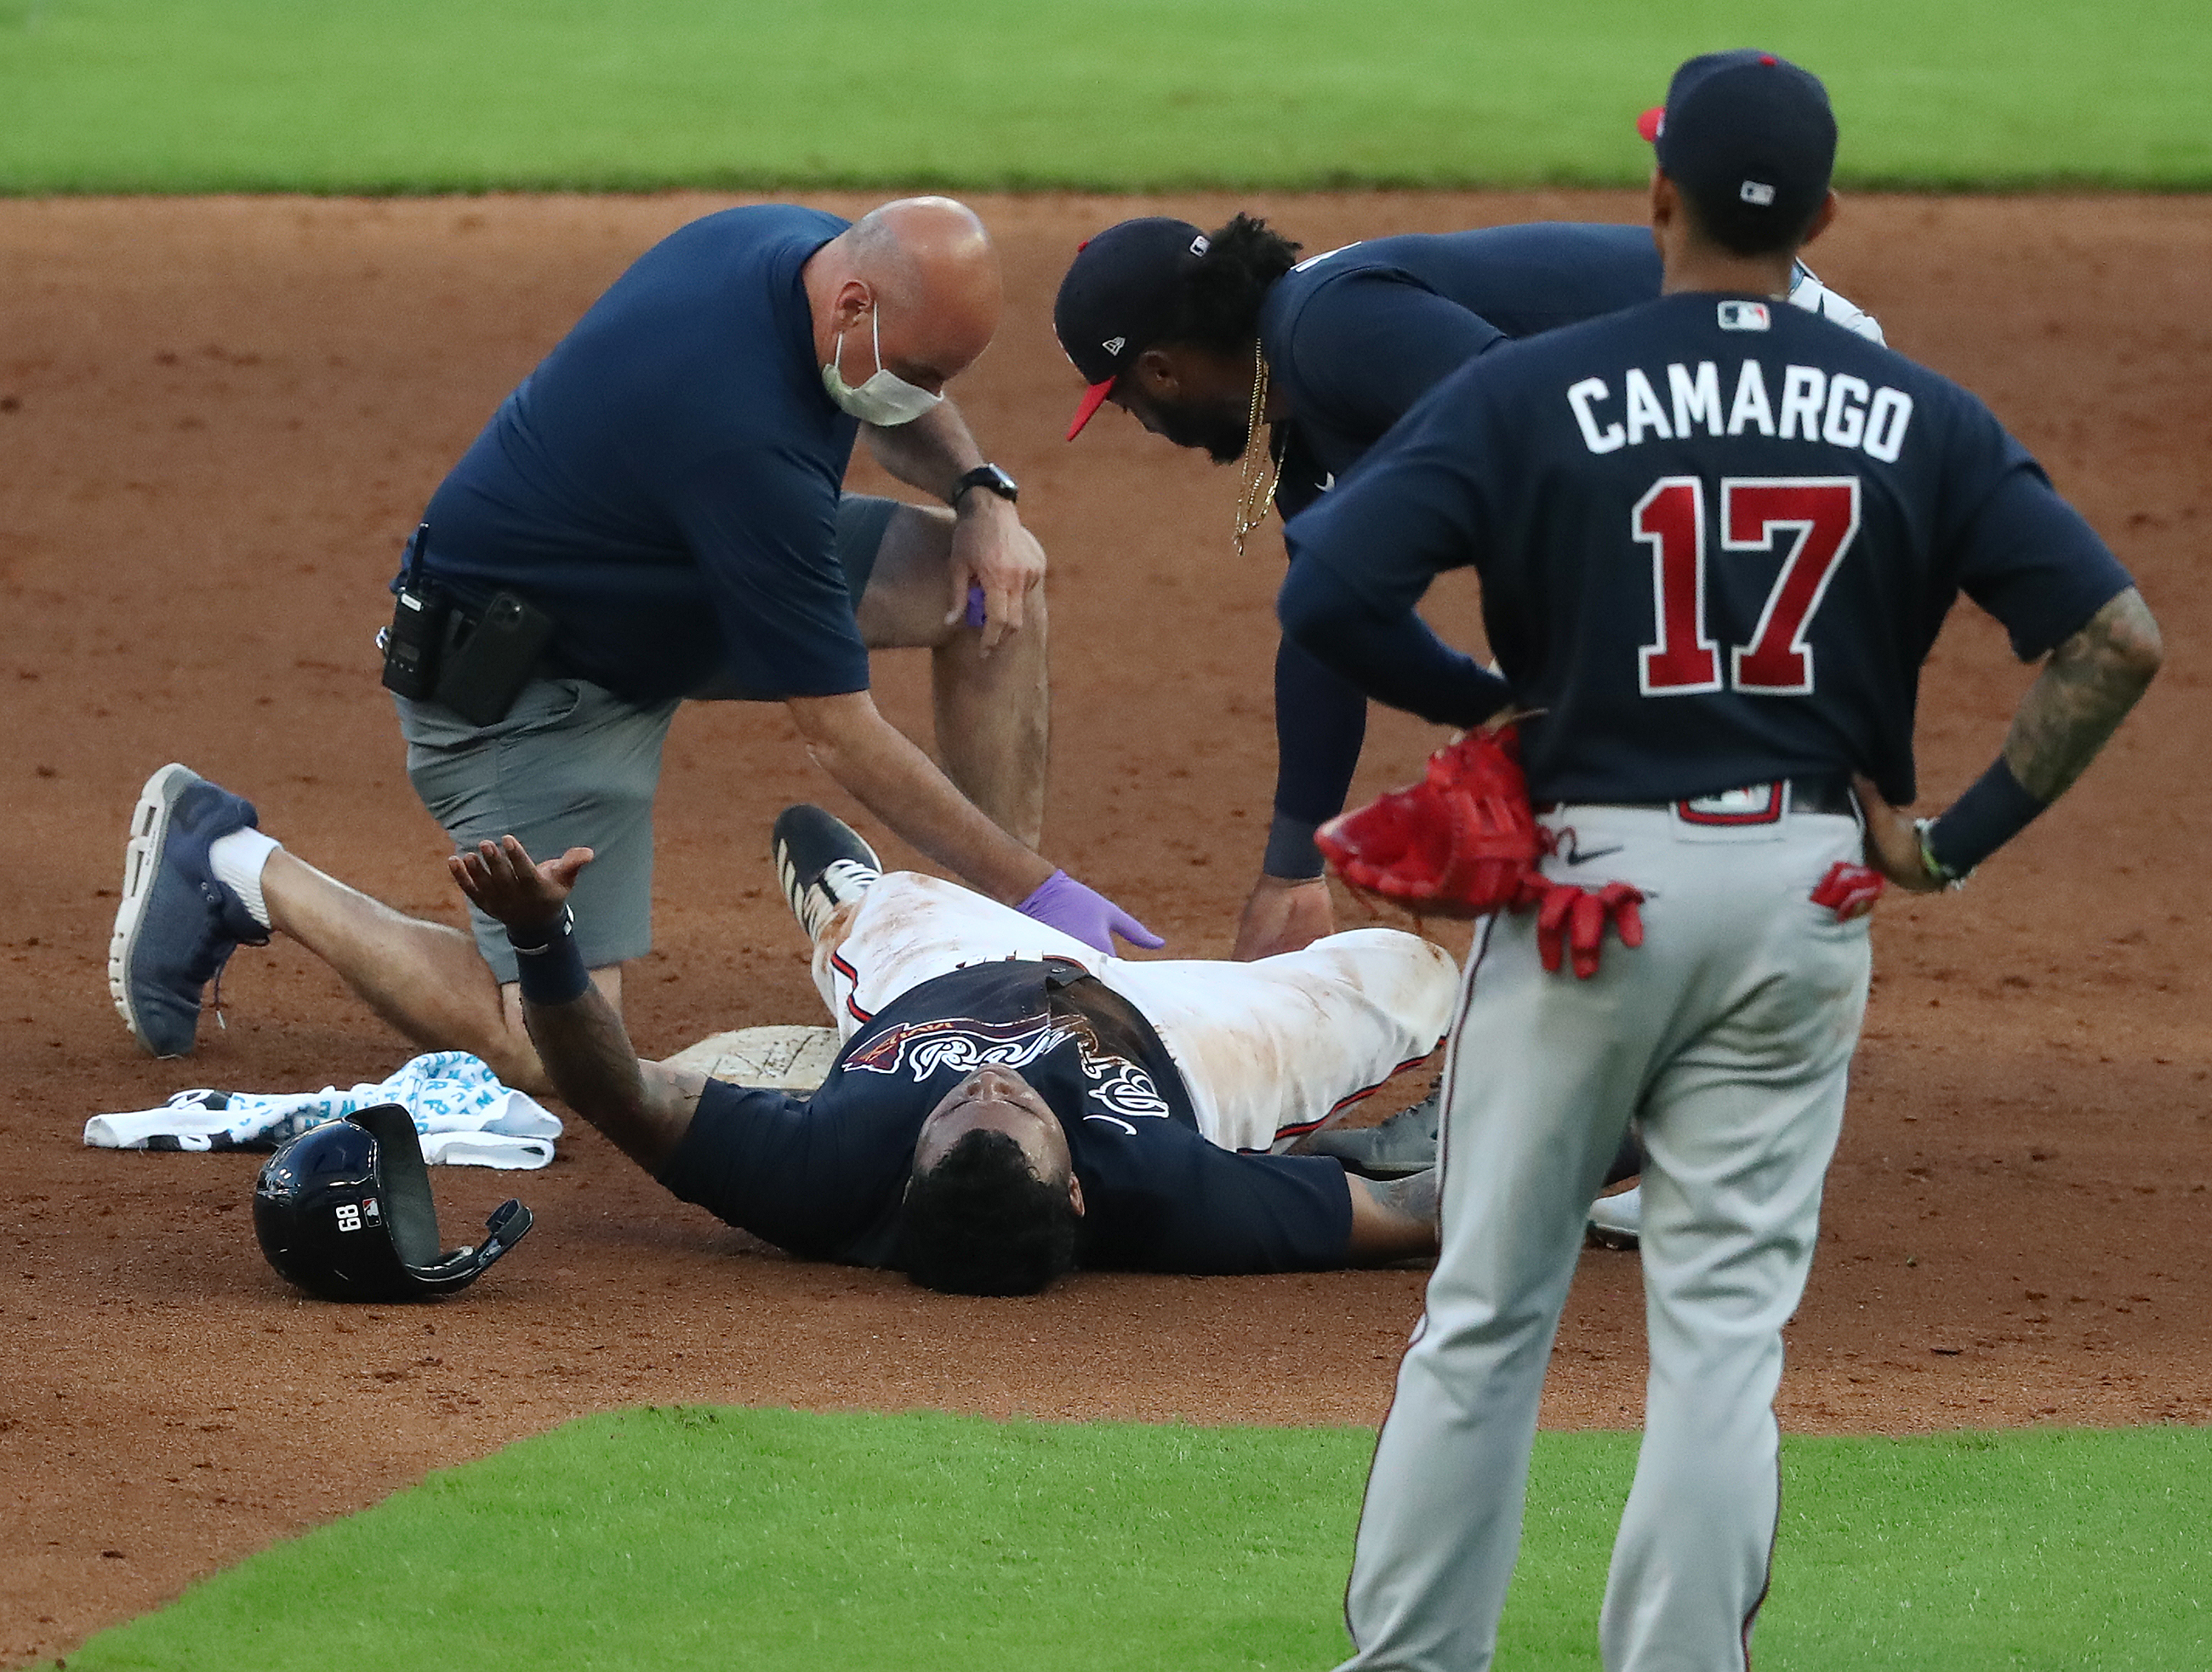 Braves reinstate Cristian Pache from injured list, option him to